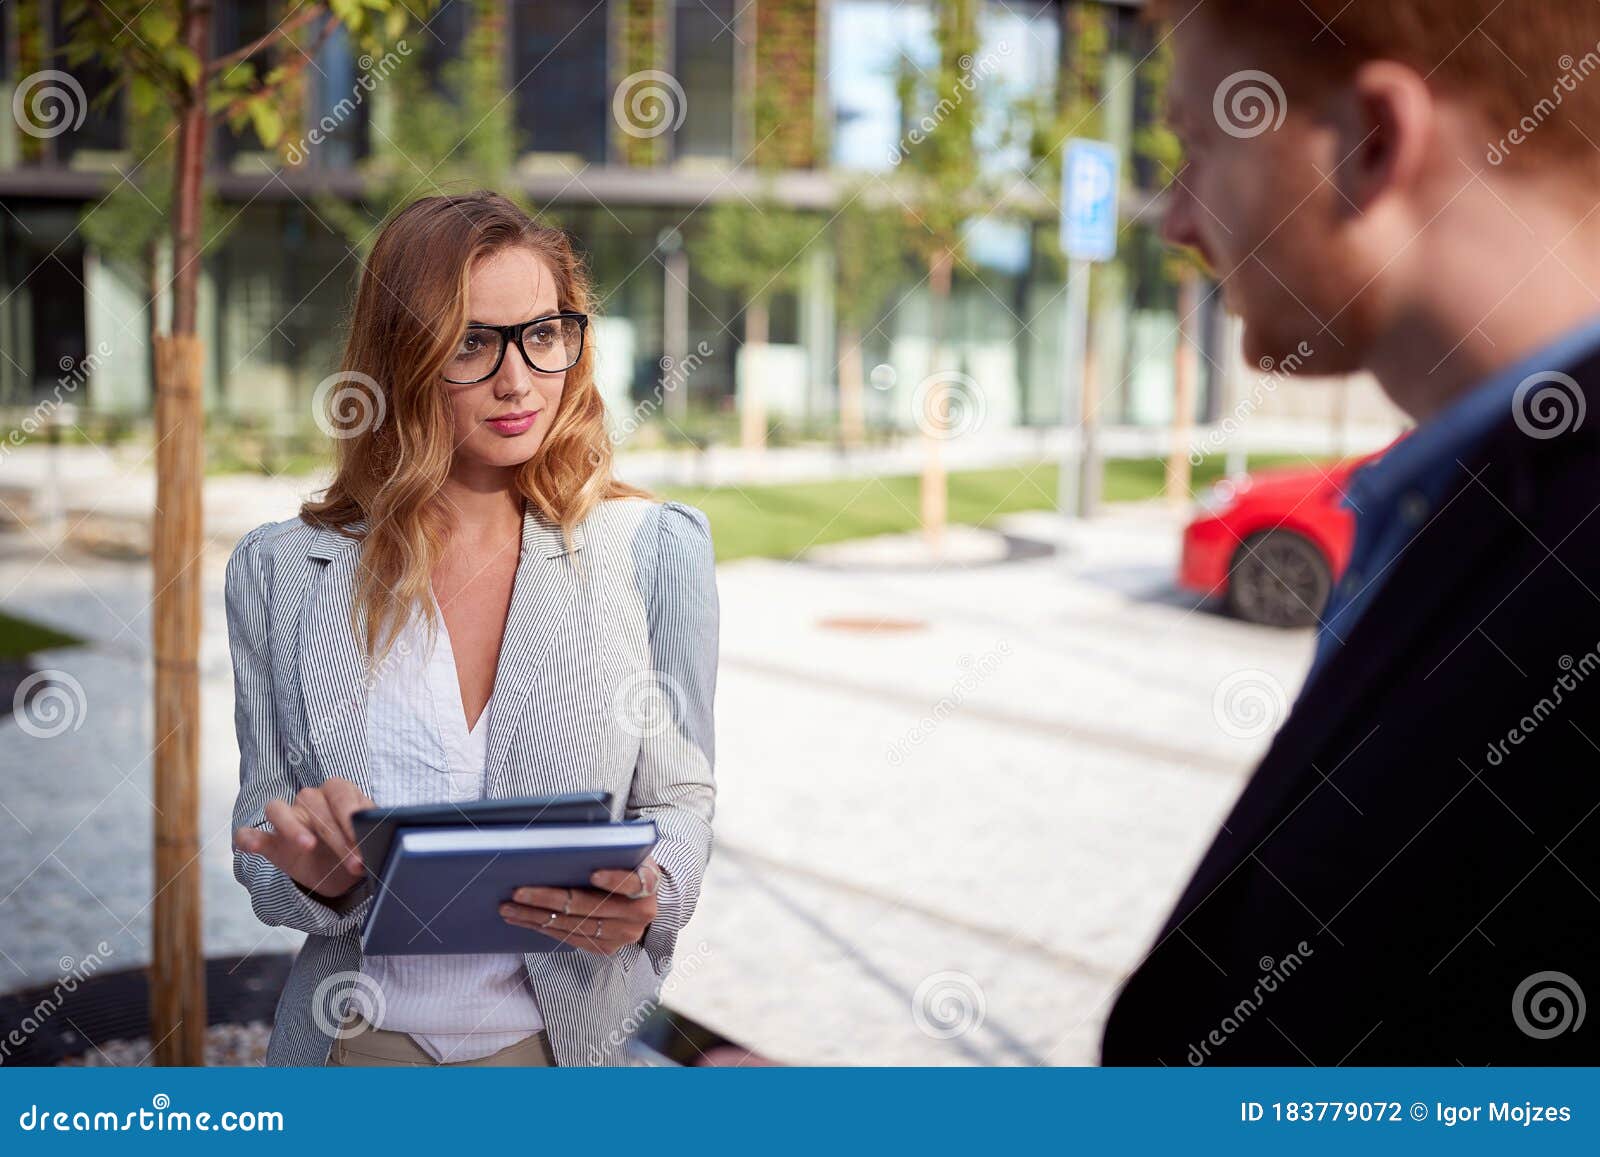 young businesswoman looking seductively  her interlocutor outdoor in front of business building. outdoor, unofficial, meeting,